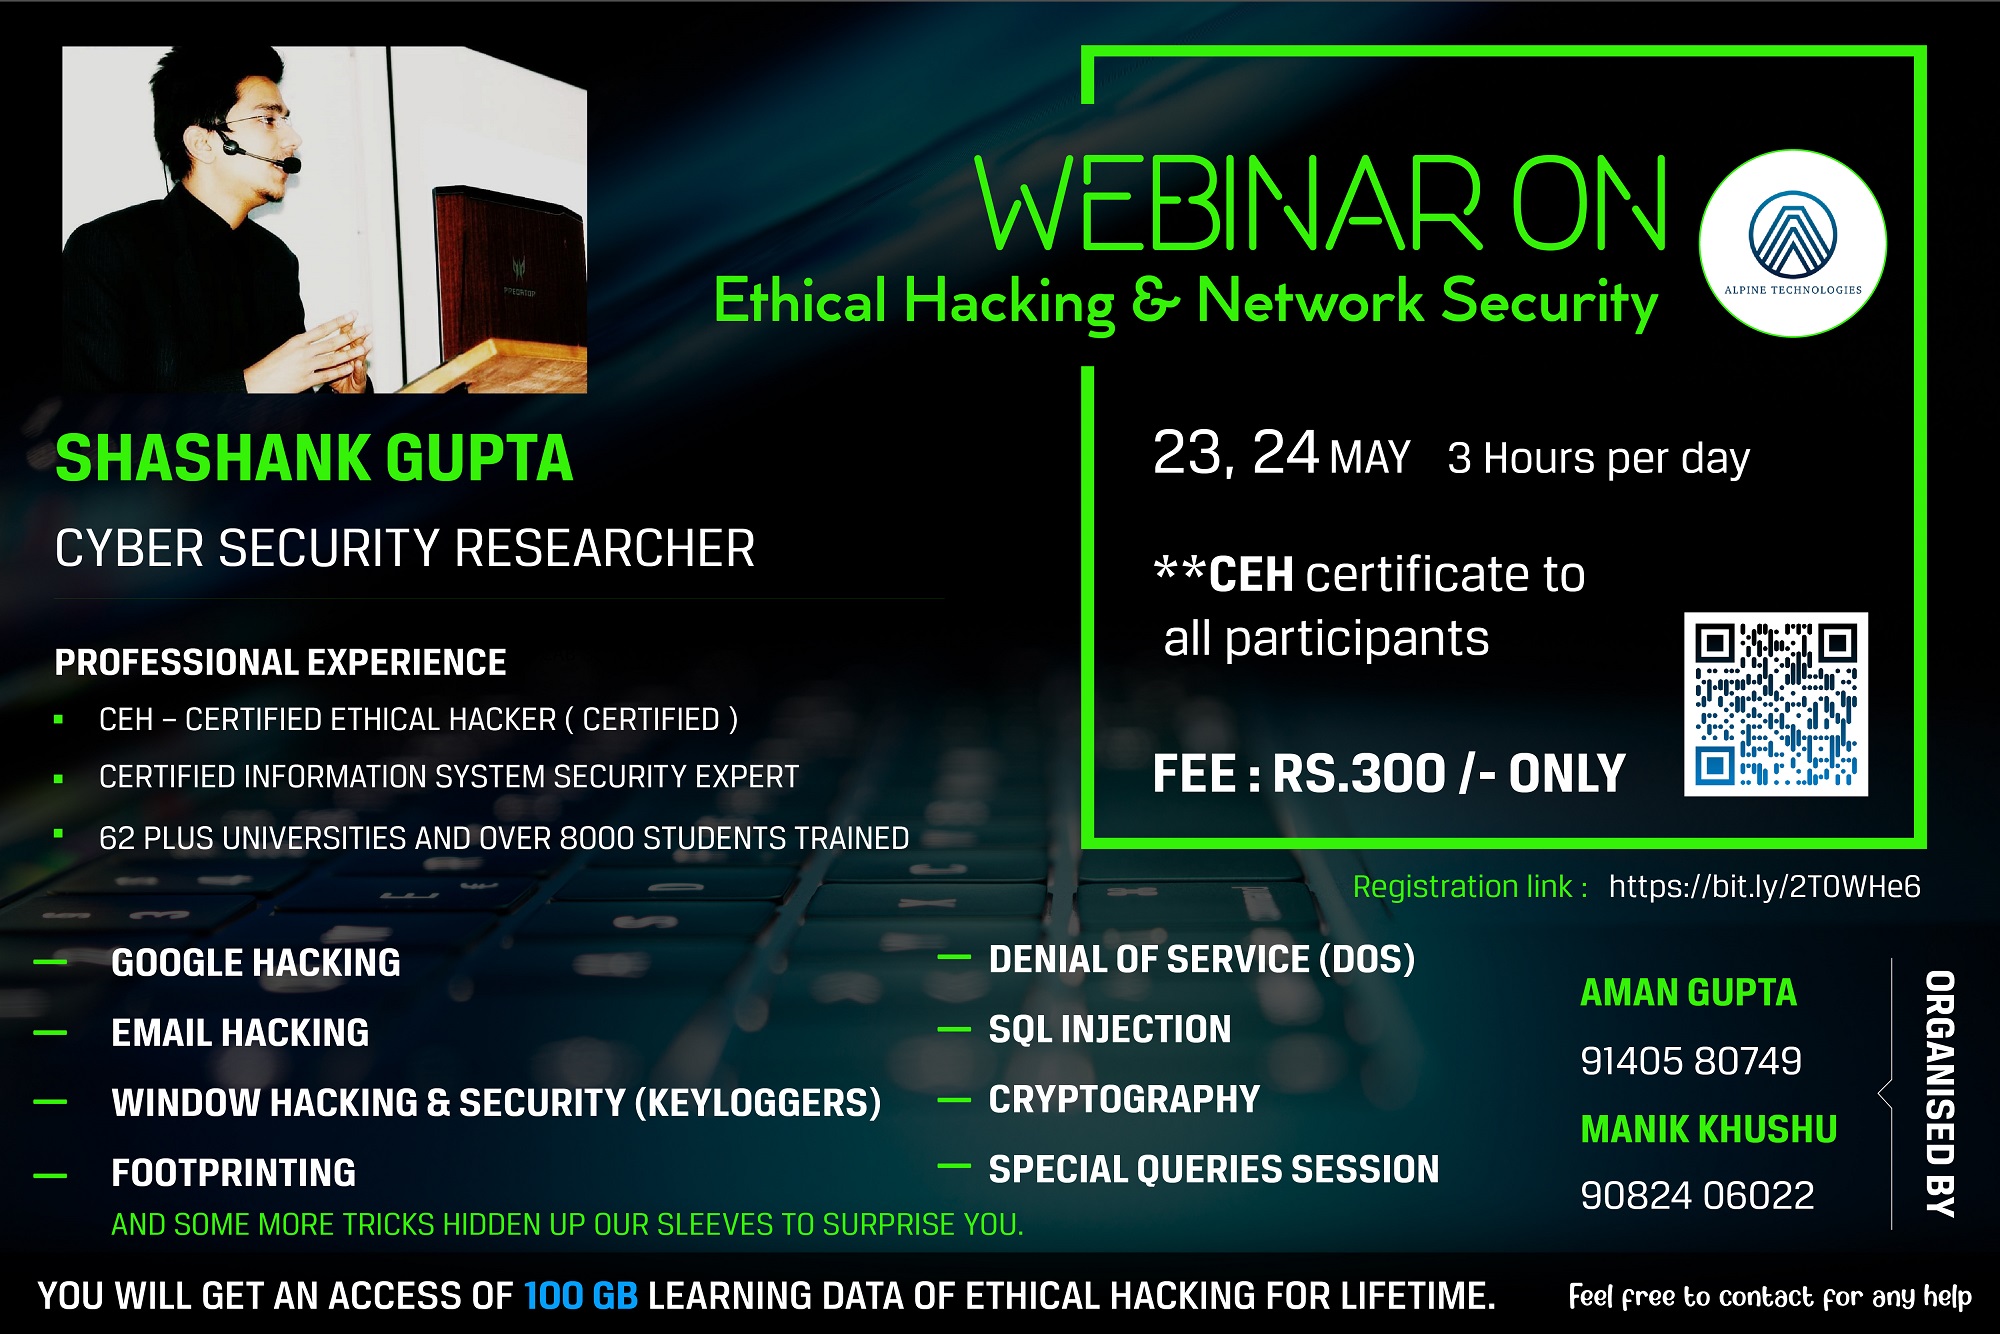 Experts Webinar on Ethical Hacking and Network Security 2020